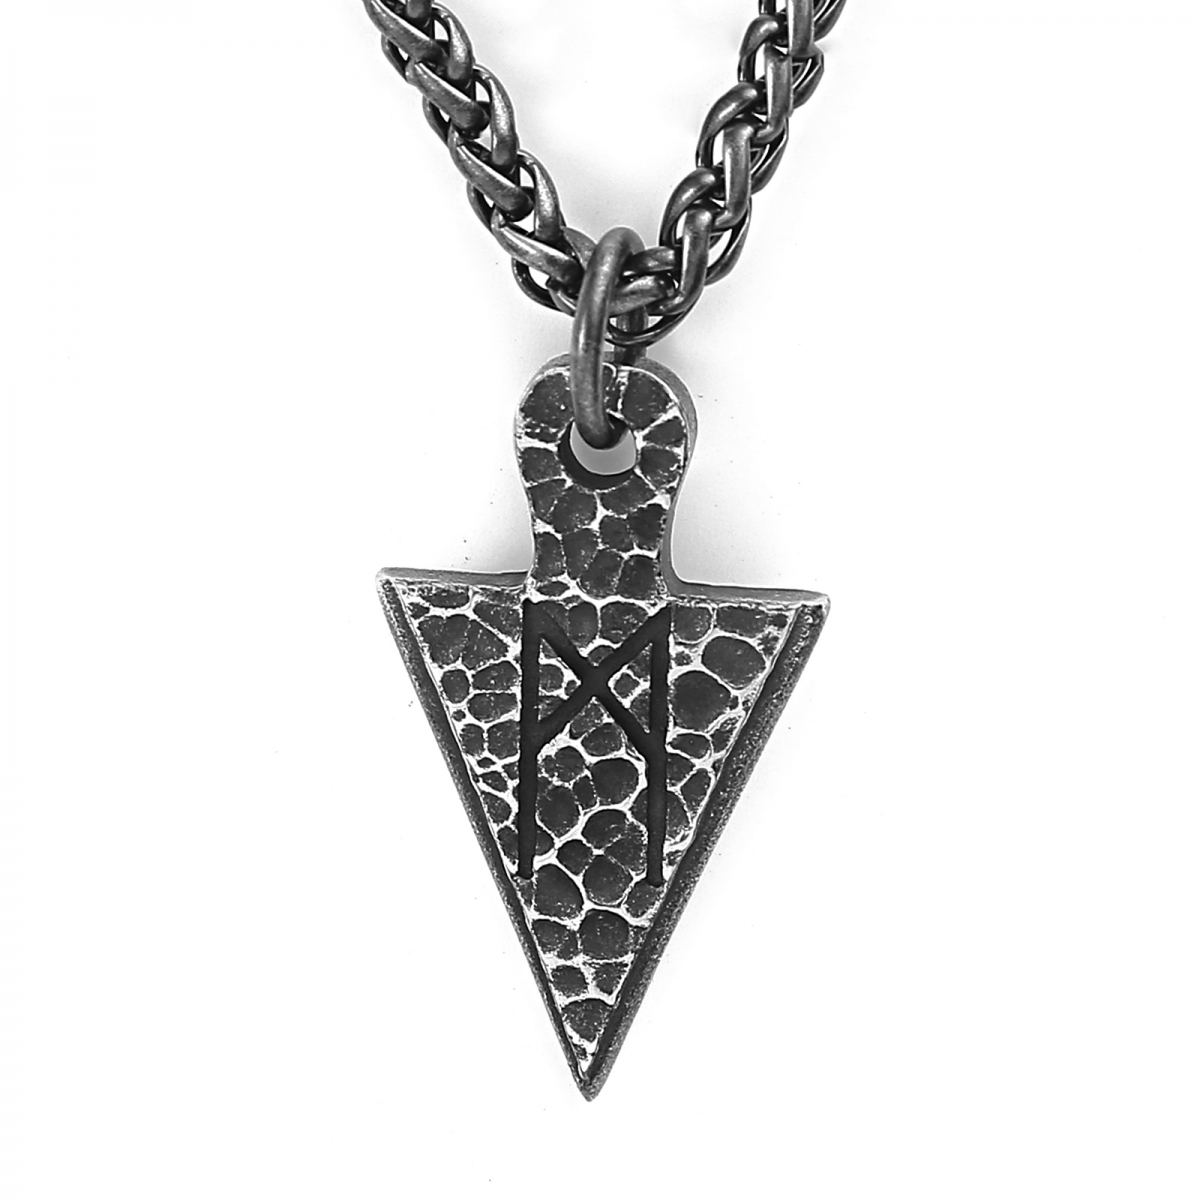 Rune Amulet Necklace US$3.2/PC-NORSECOLLECTION- Viking Jewelry,Viking Necklace,Viking Bracelet,Viking Rings,Viking Mugs,Viking Accessories,Viking Crafts